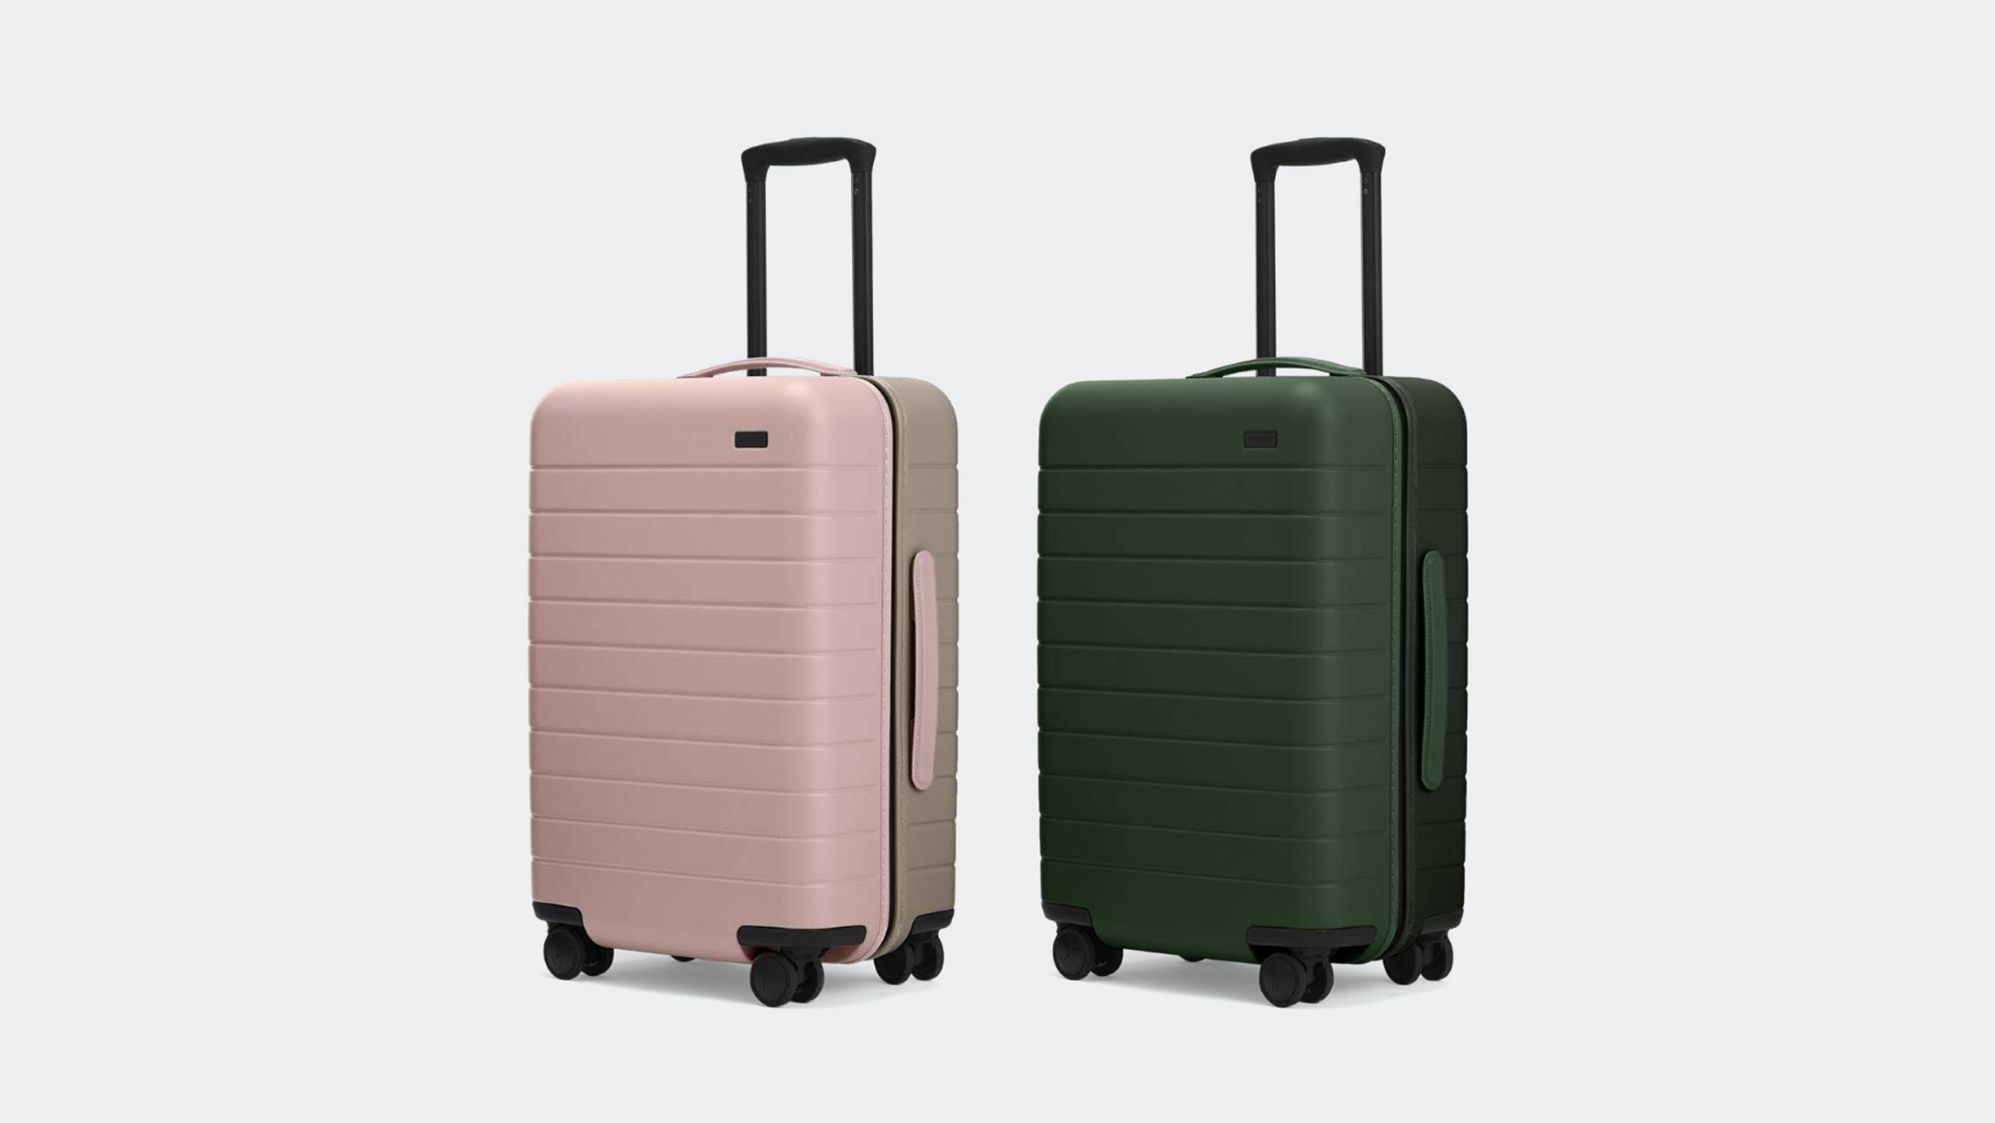 Away holiday collection: Two-tone polycarbonate suitcase | CNN Underscored